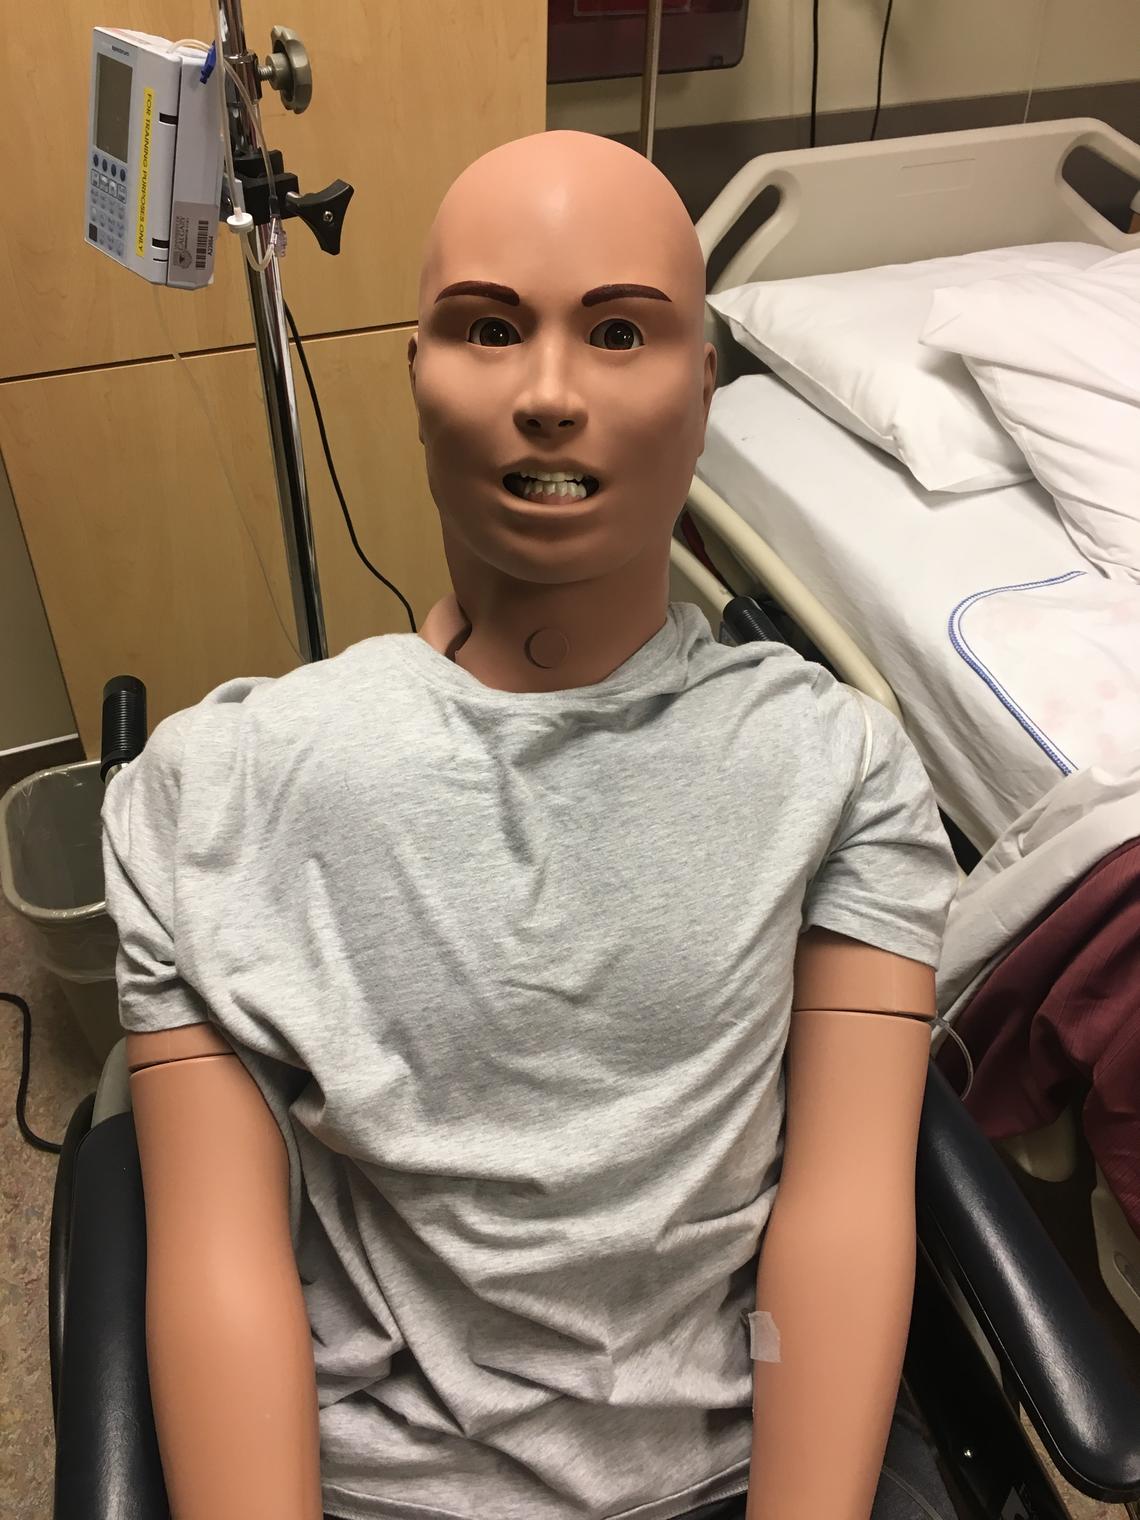 The original manikins were plain and homogenous, while the EchoMasks allow the simulations to feature more realistic-looking patients.